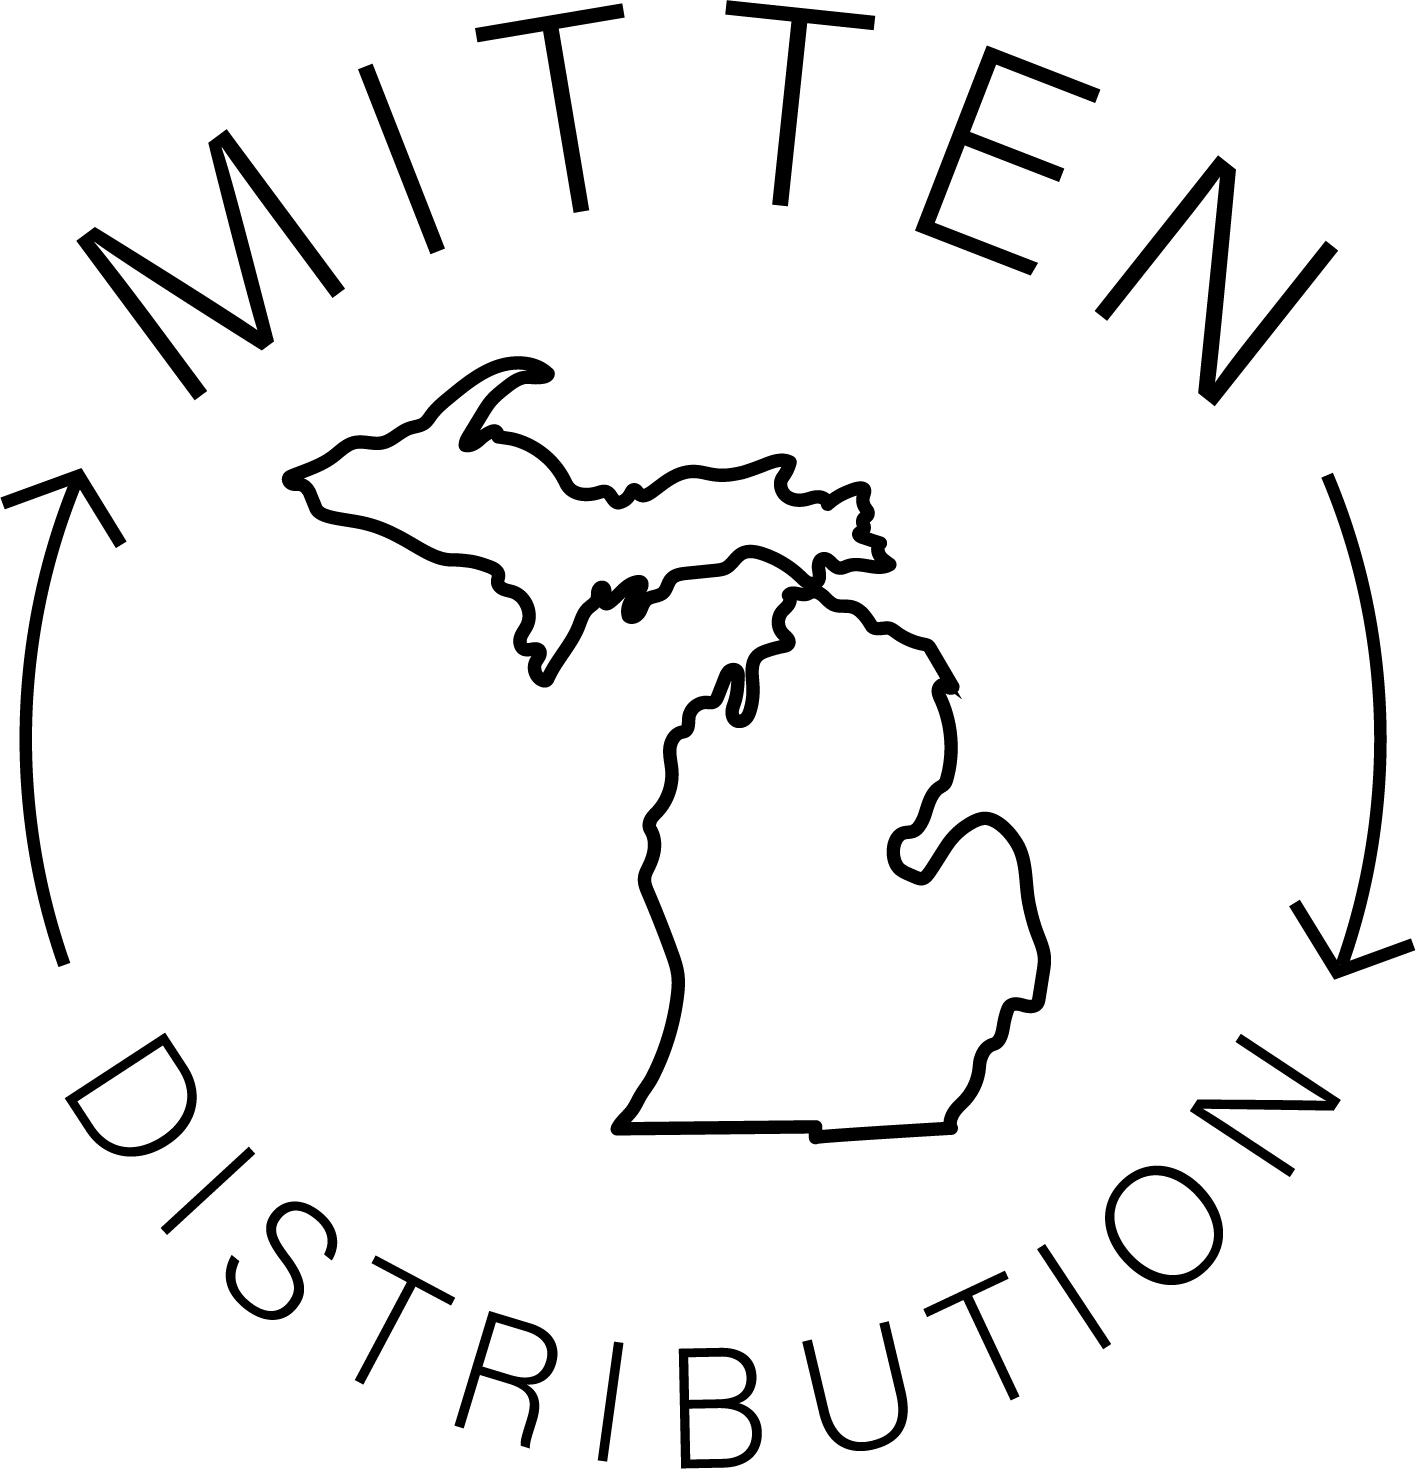 Mitten Distribution & Containers